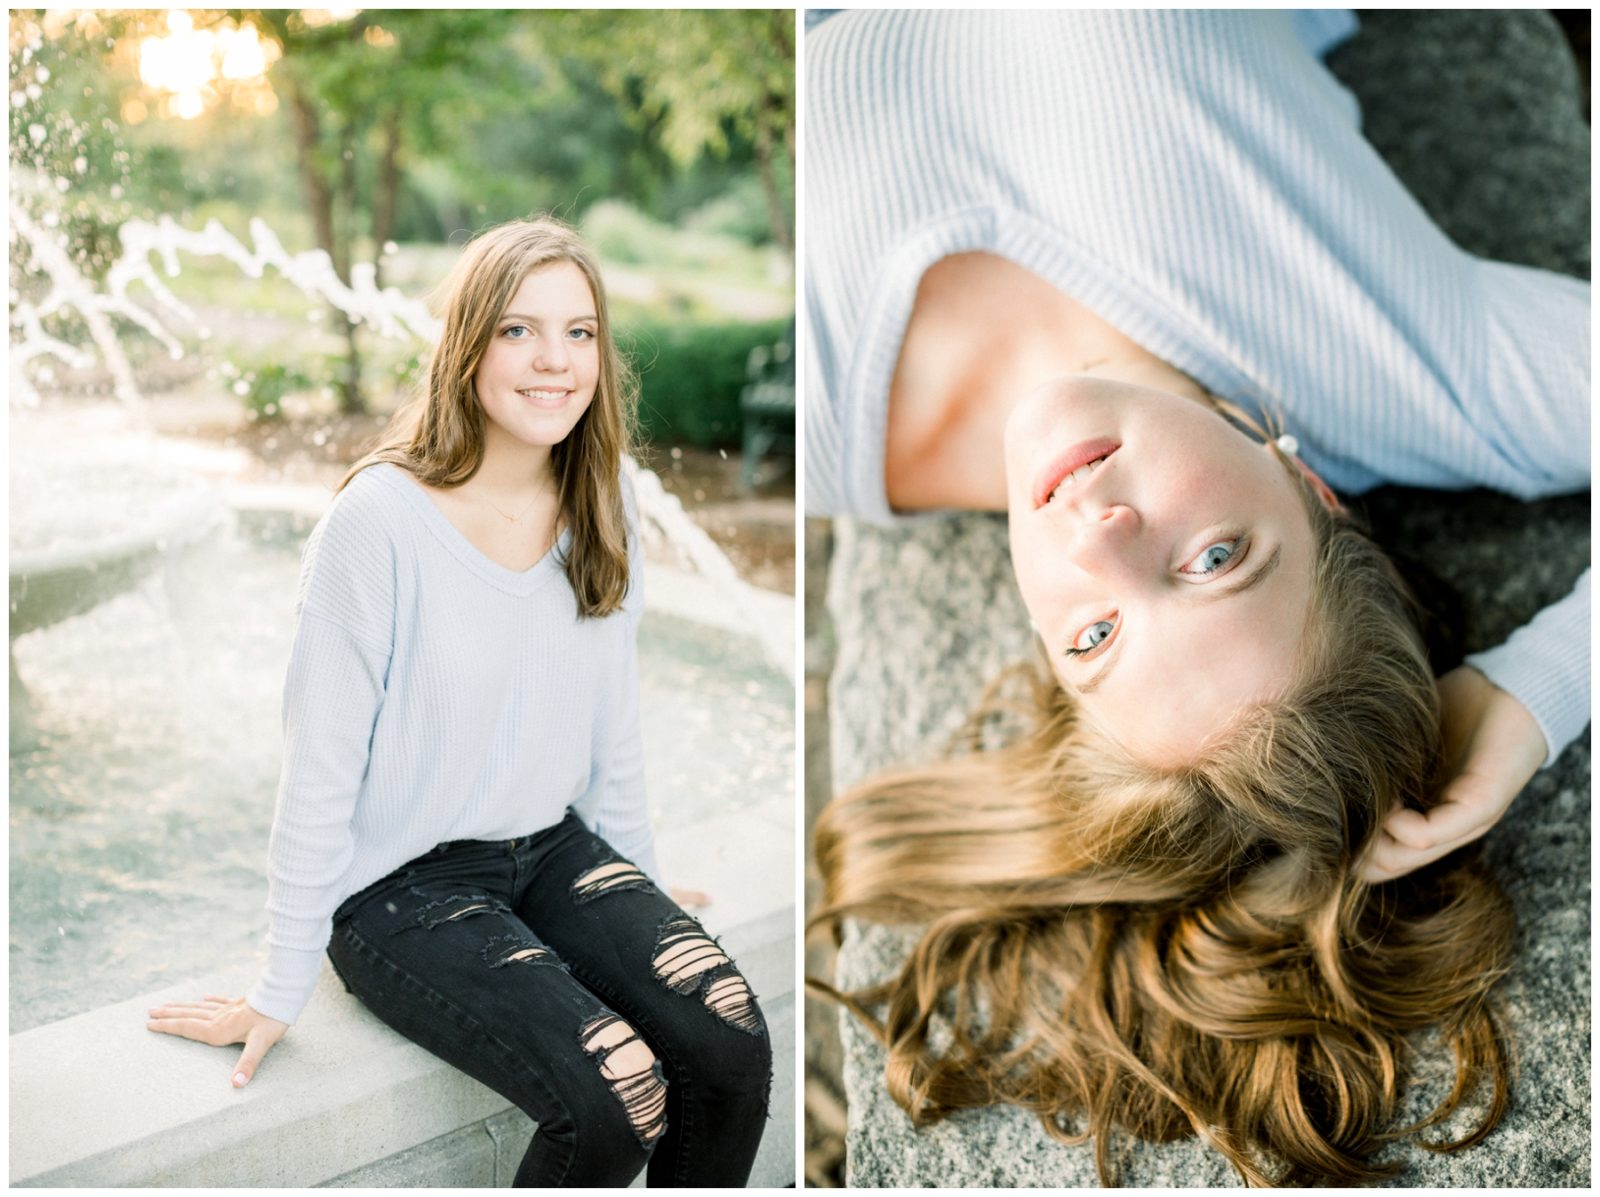 Golden Light Senior Session of a young girl in front of a water fountain and laying down.